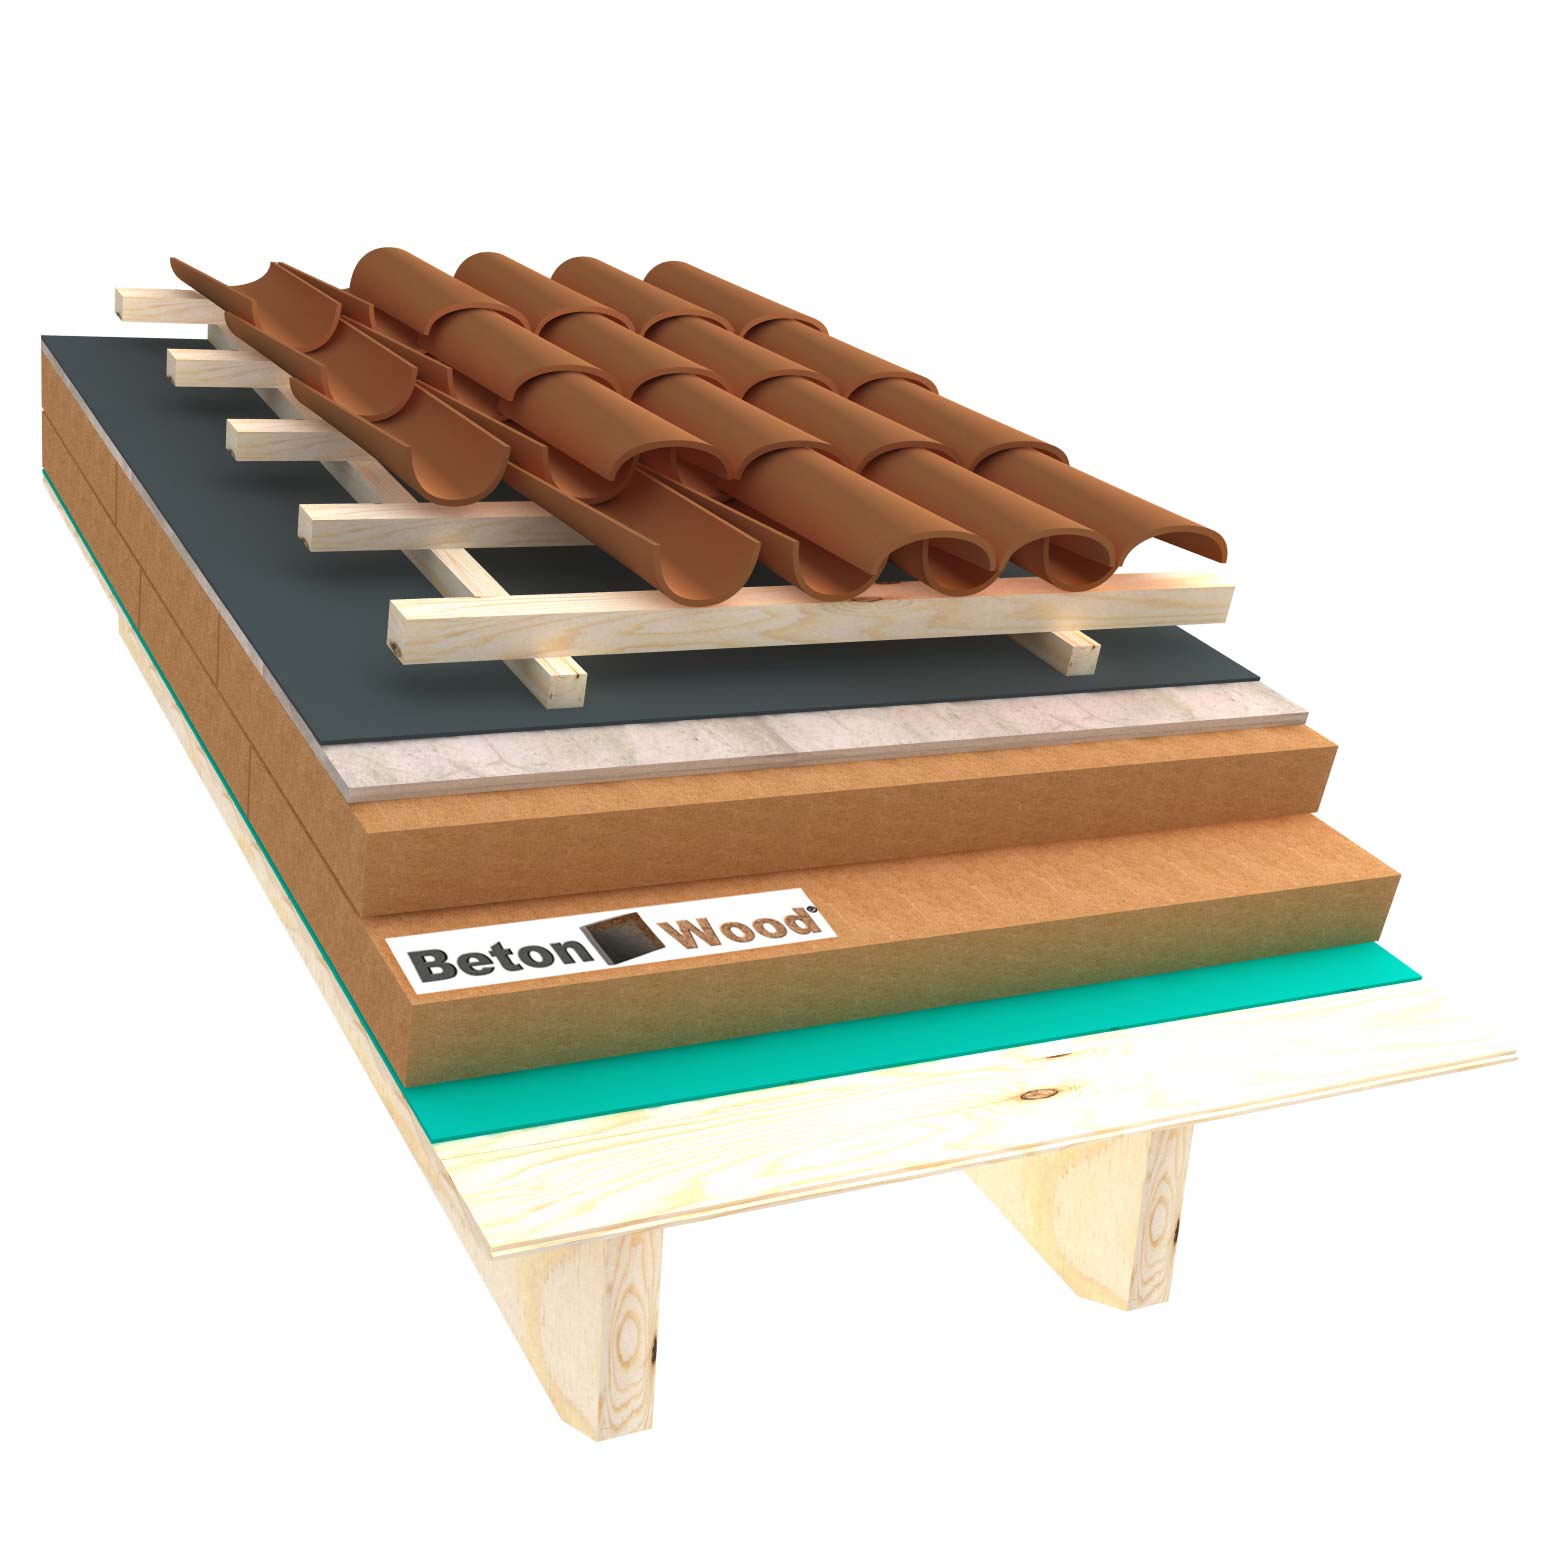 Ventilated roof with wood fiber Therm on matchboarding